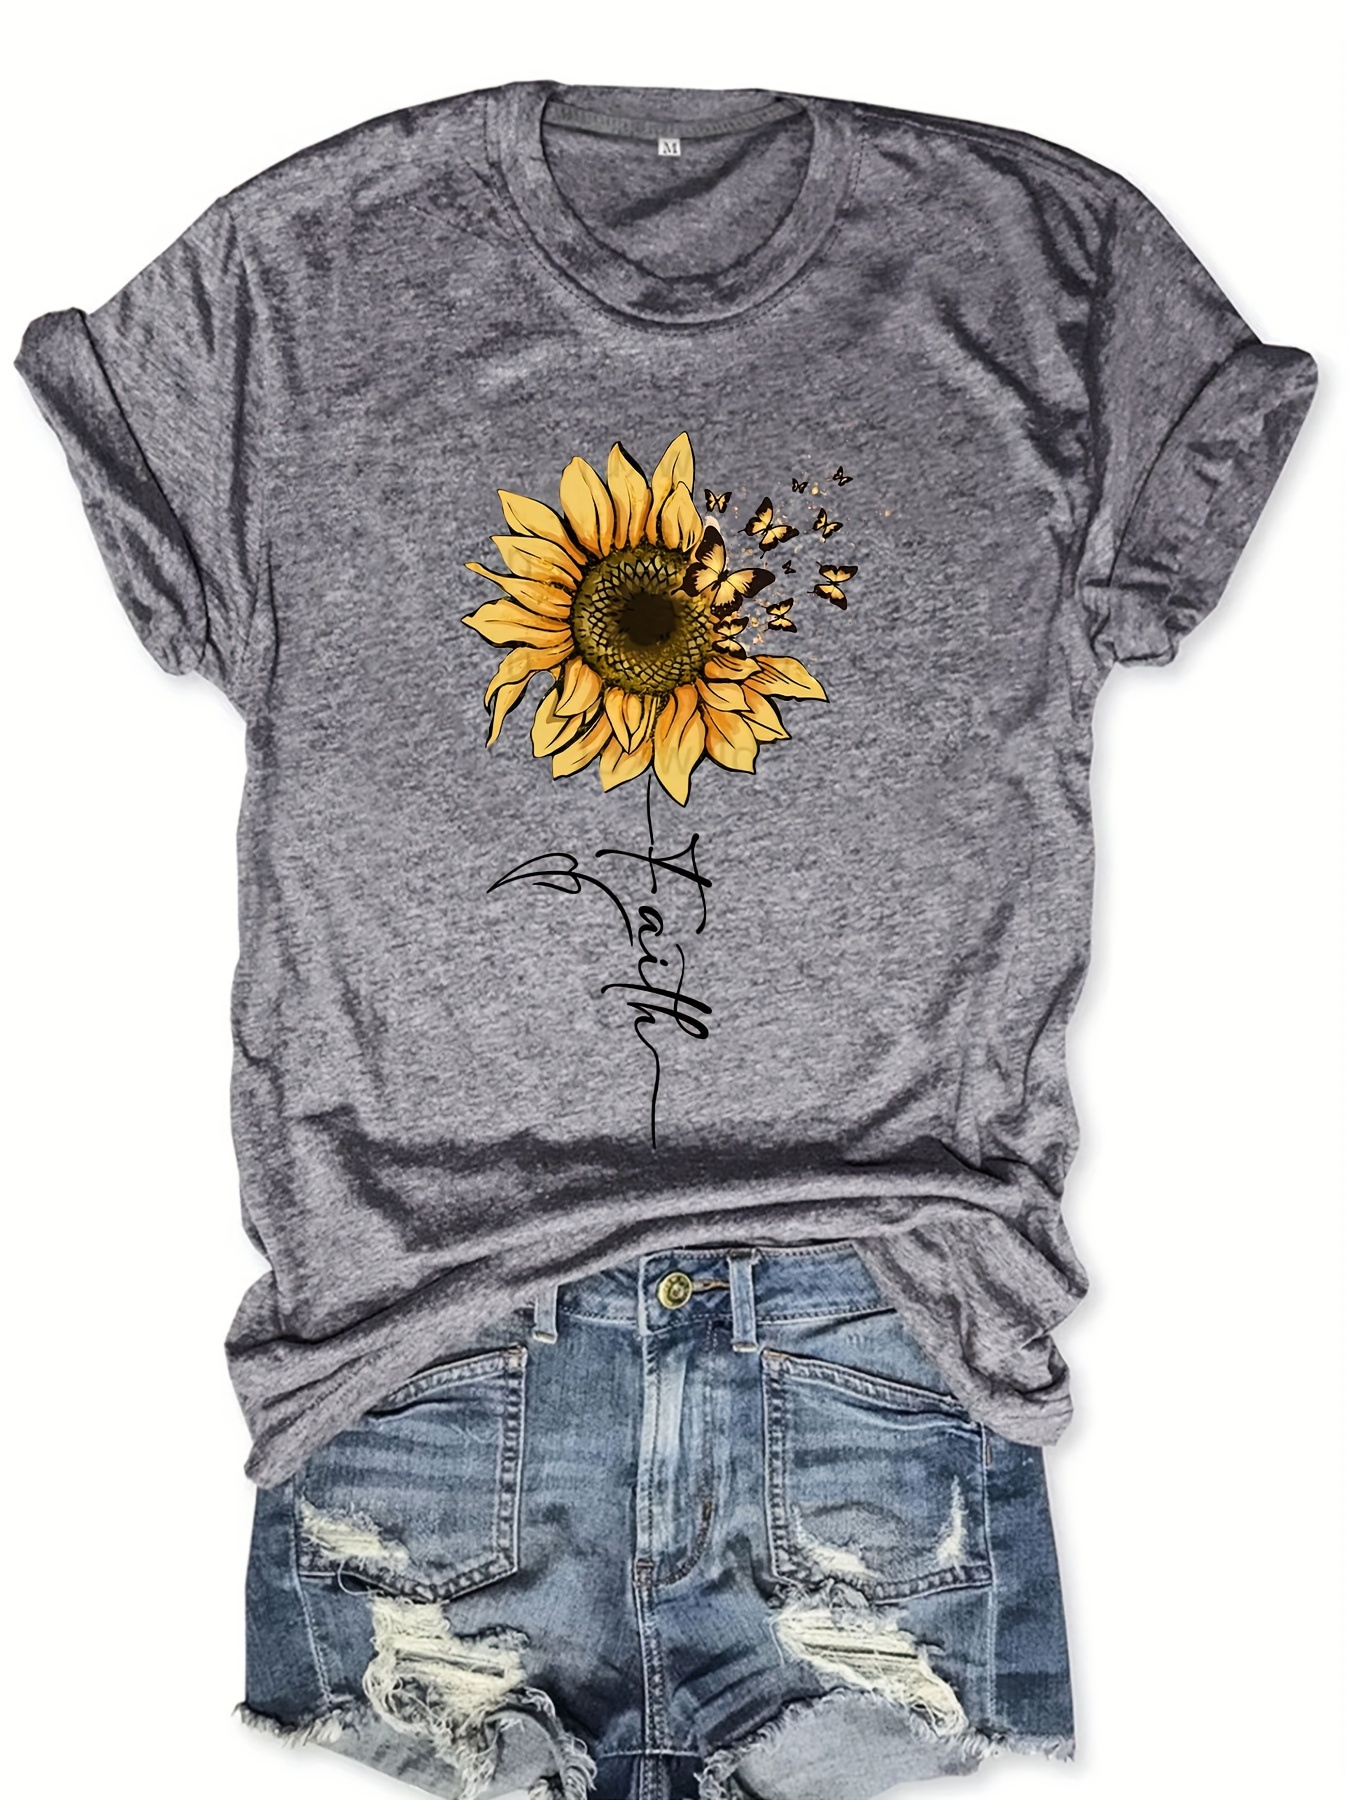  Summer Plus Women's Summer Sunflower T Shirt Cute,1 Items one  Dollar Items only,Open Box Deals Clearance in Warehouse,Todays Deals of The  Day,Boho t : Sports & Outdoors